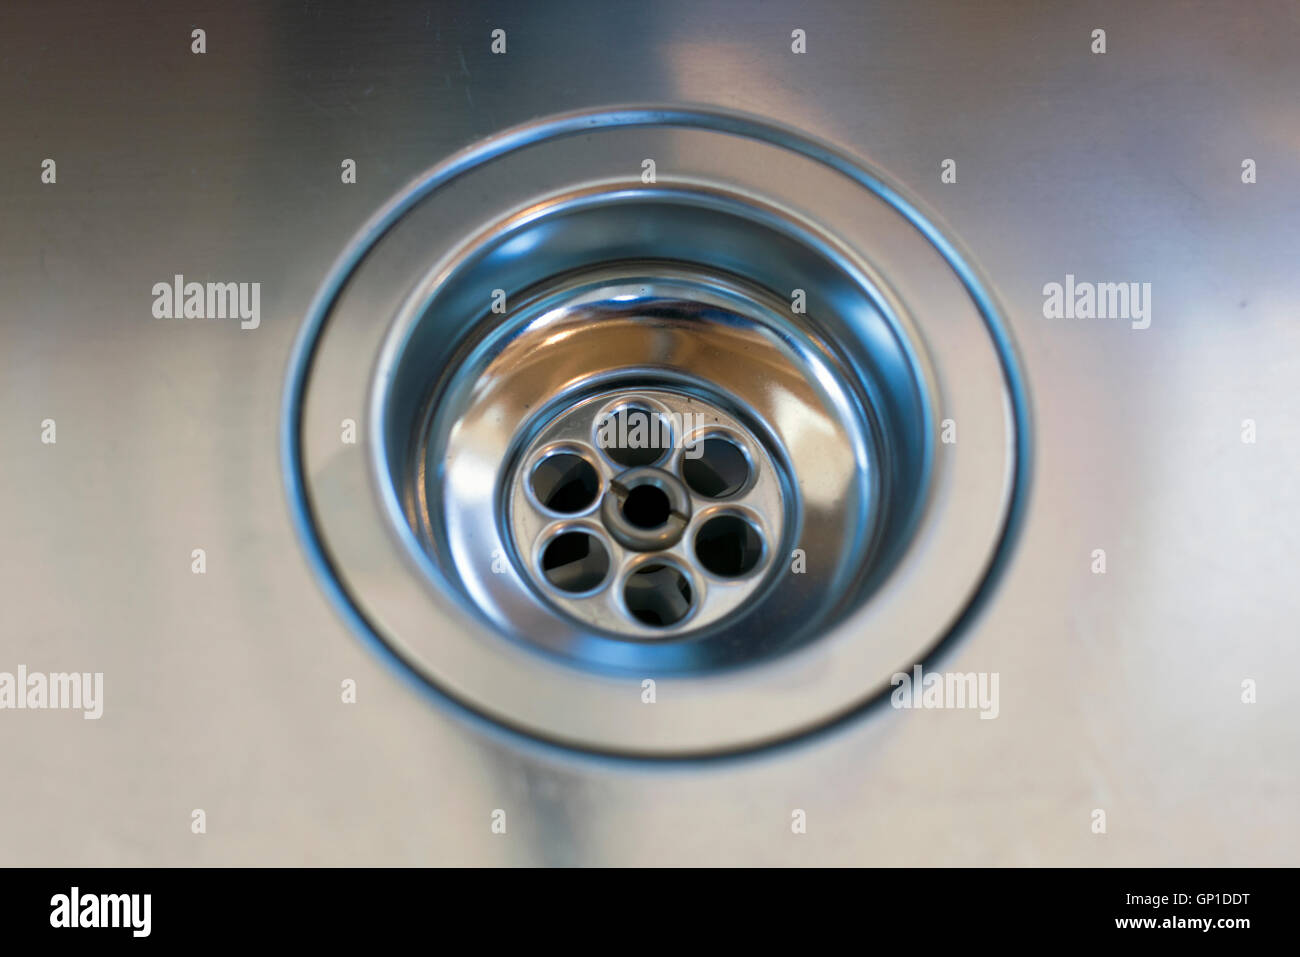 close up of a stainless steel sink plug hole Stock Photo